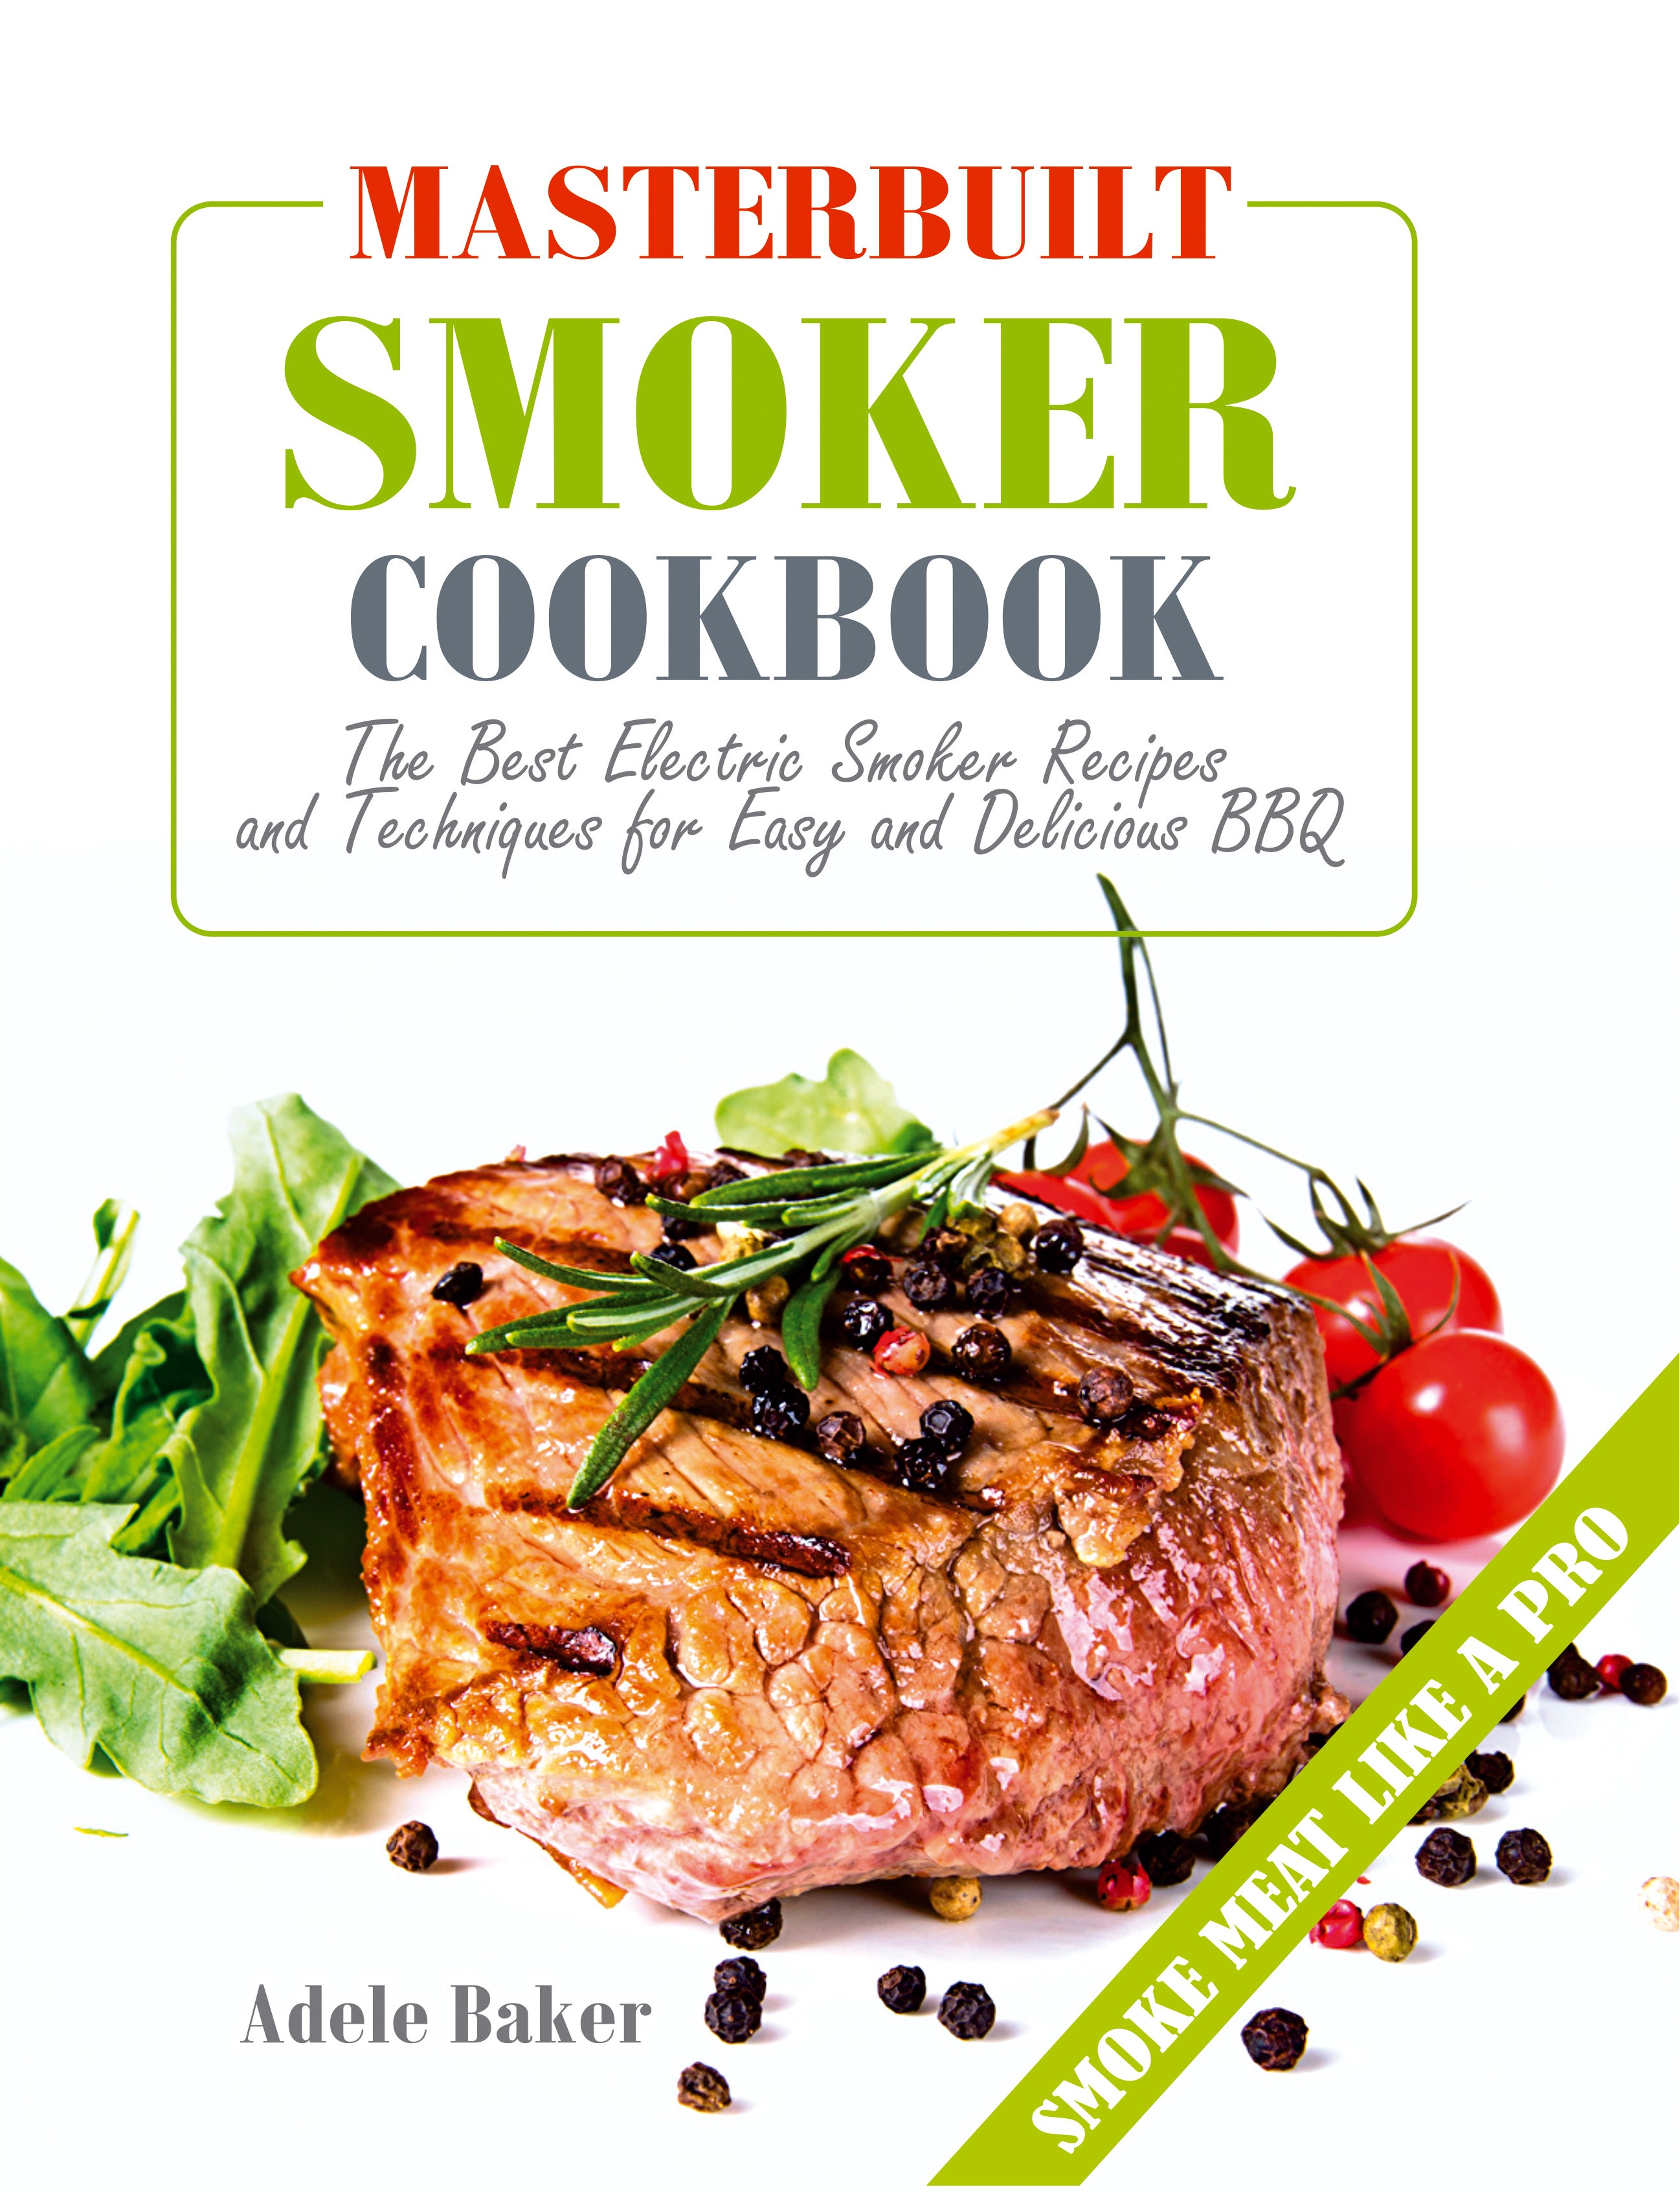 FREE: Masterbuilt Smoker Cookbook: The Best Electric Smoker Recipes and Technique for Easy and Delicious BBQ by Adele Baker